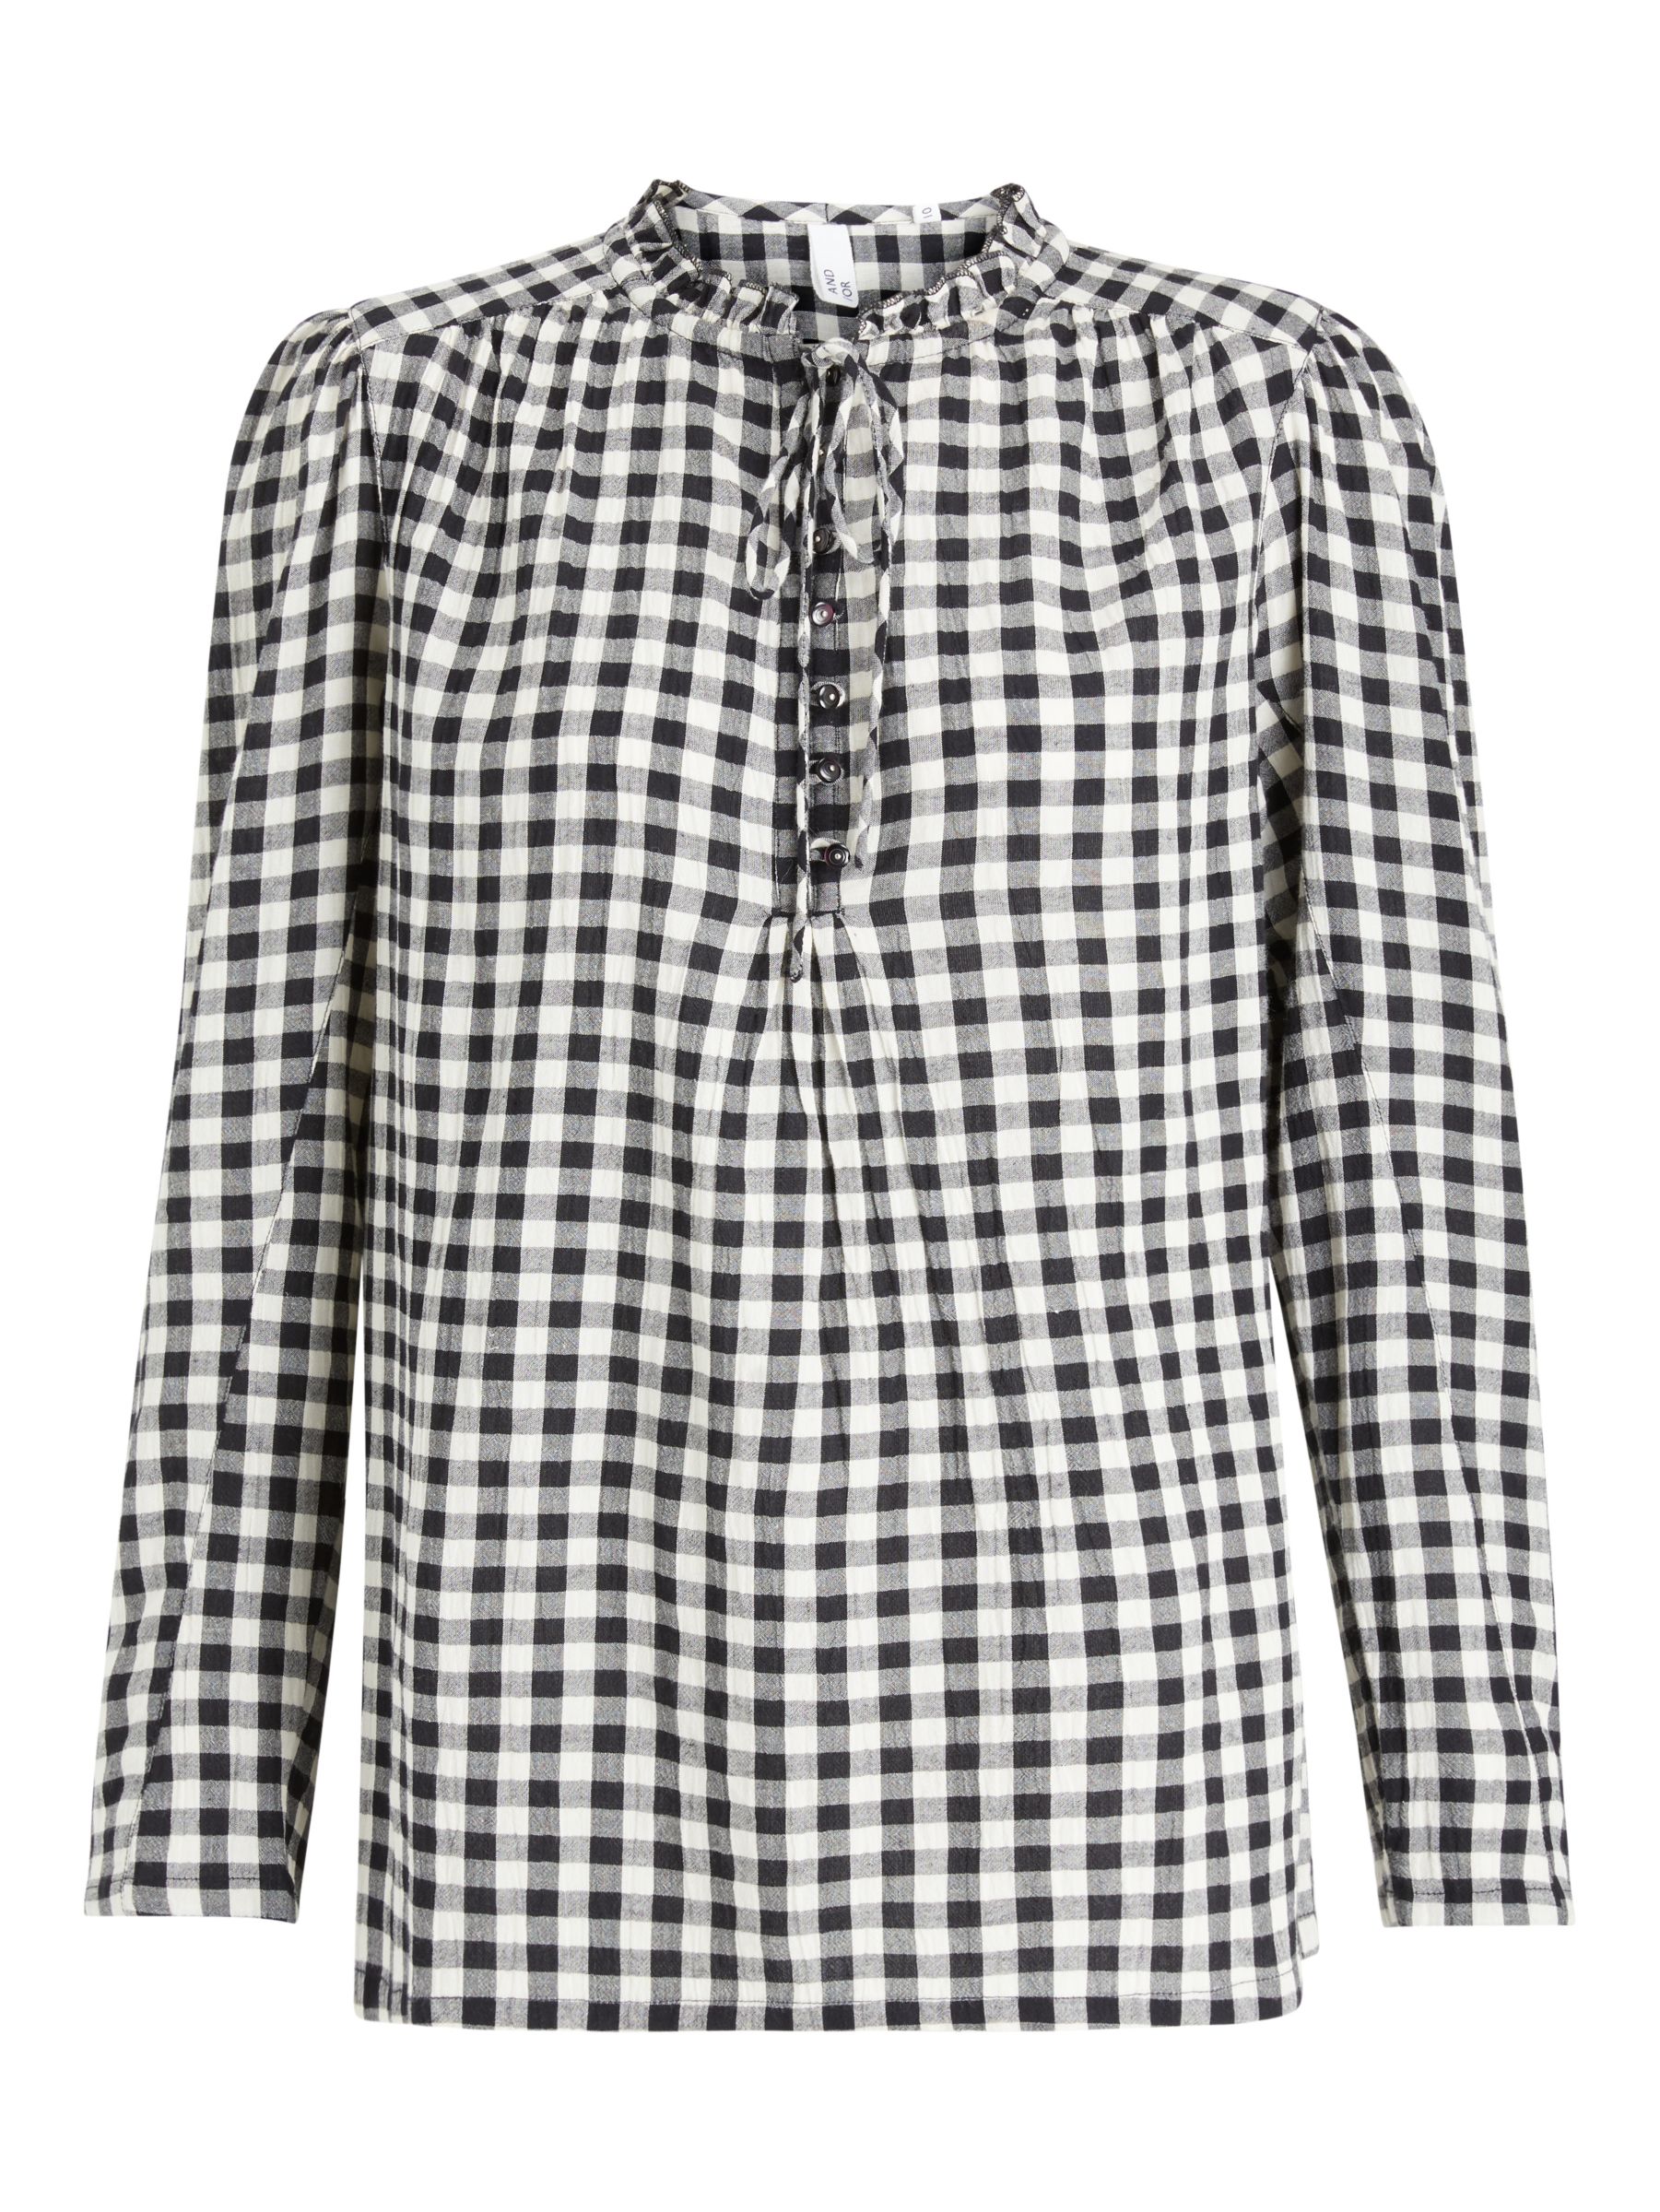 AND/OR Maudie Check Shirt, Black/White